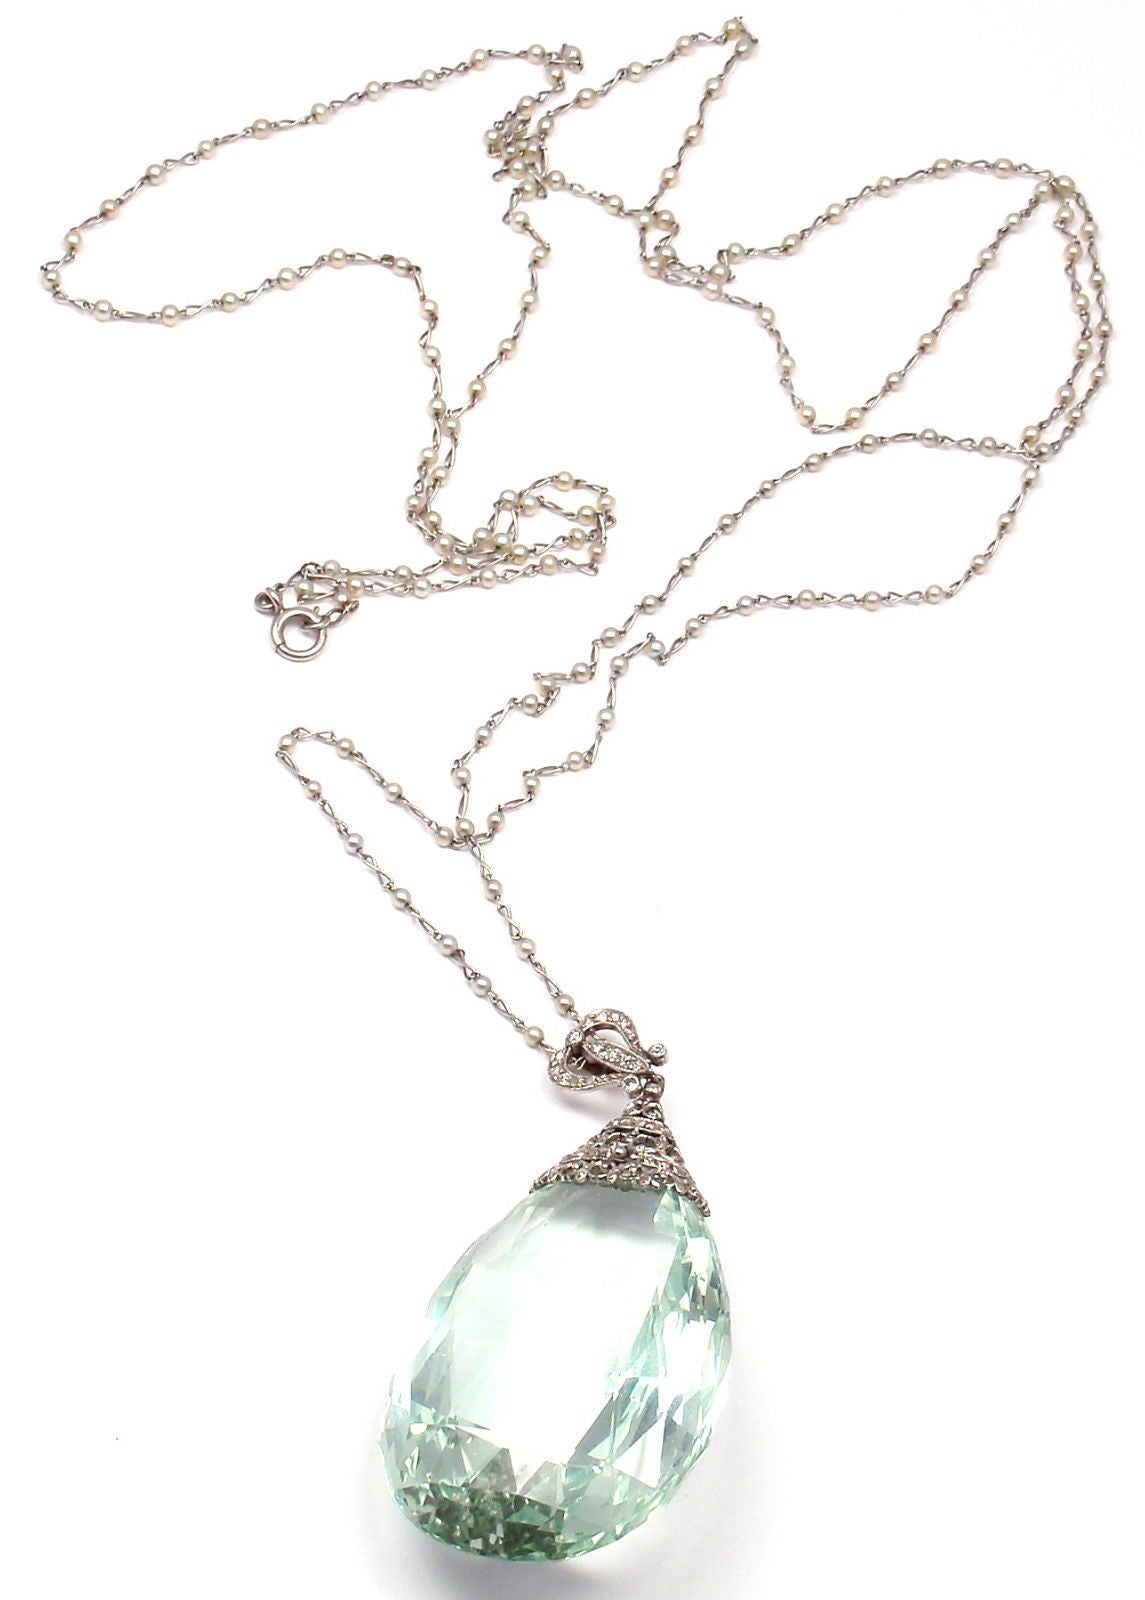 Estate 18k White Gold Diamond Large 167ct Aquamarine Pendant Necklace.
With 1 pear shape large aquamarine 48mm x 32mm total weight approx. 167ct
152 round seed pearls 2.5mm each
round single cut diamonds

Measurements:
Chain: Chain: Length